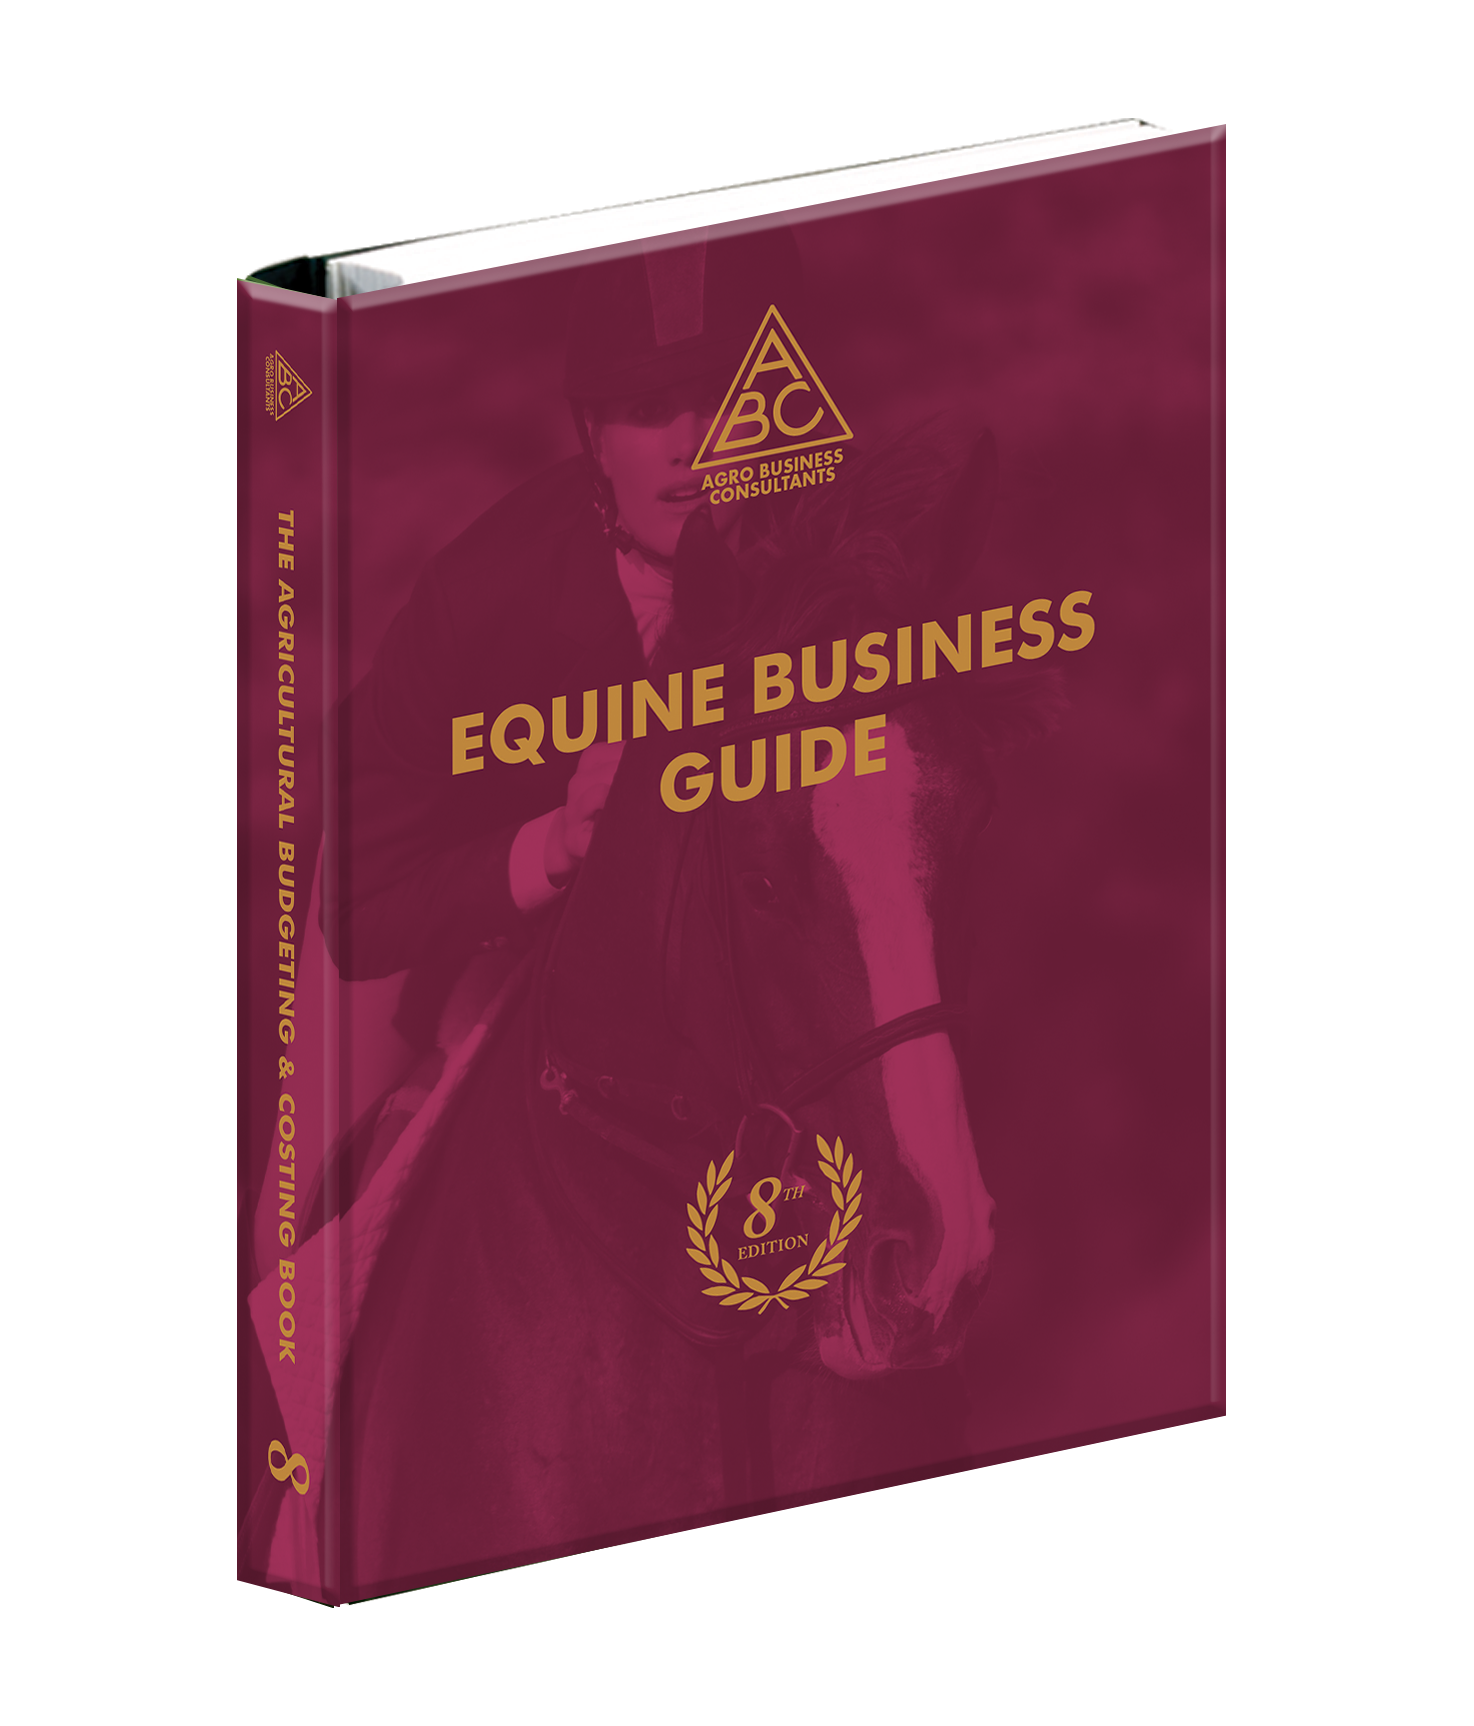 The Equine Business Guide - 8th Edition product shot